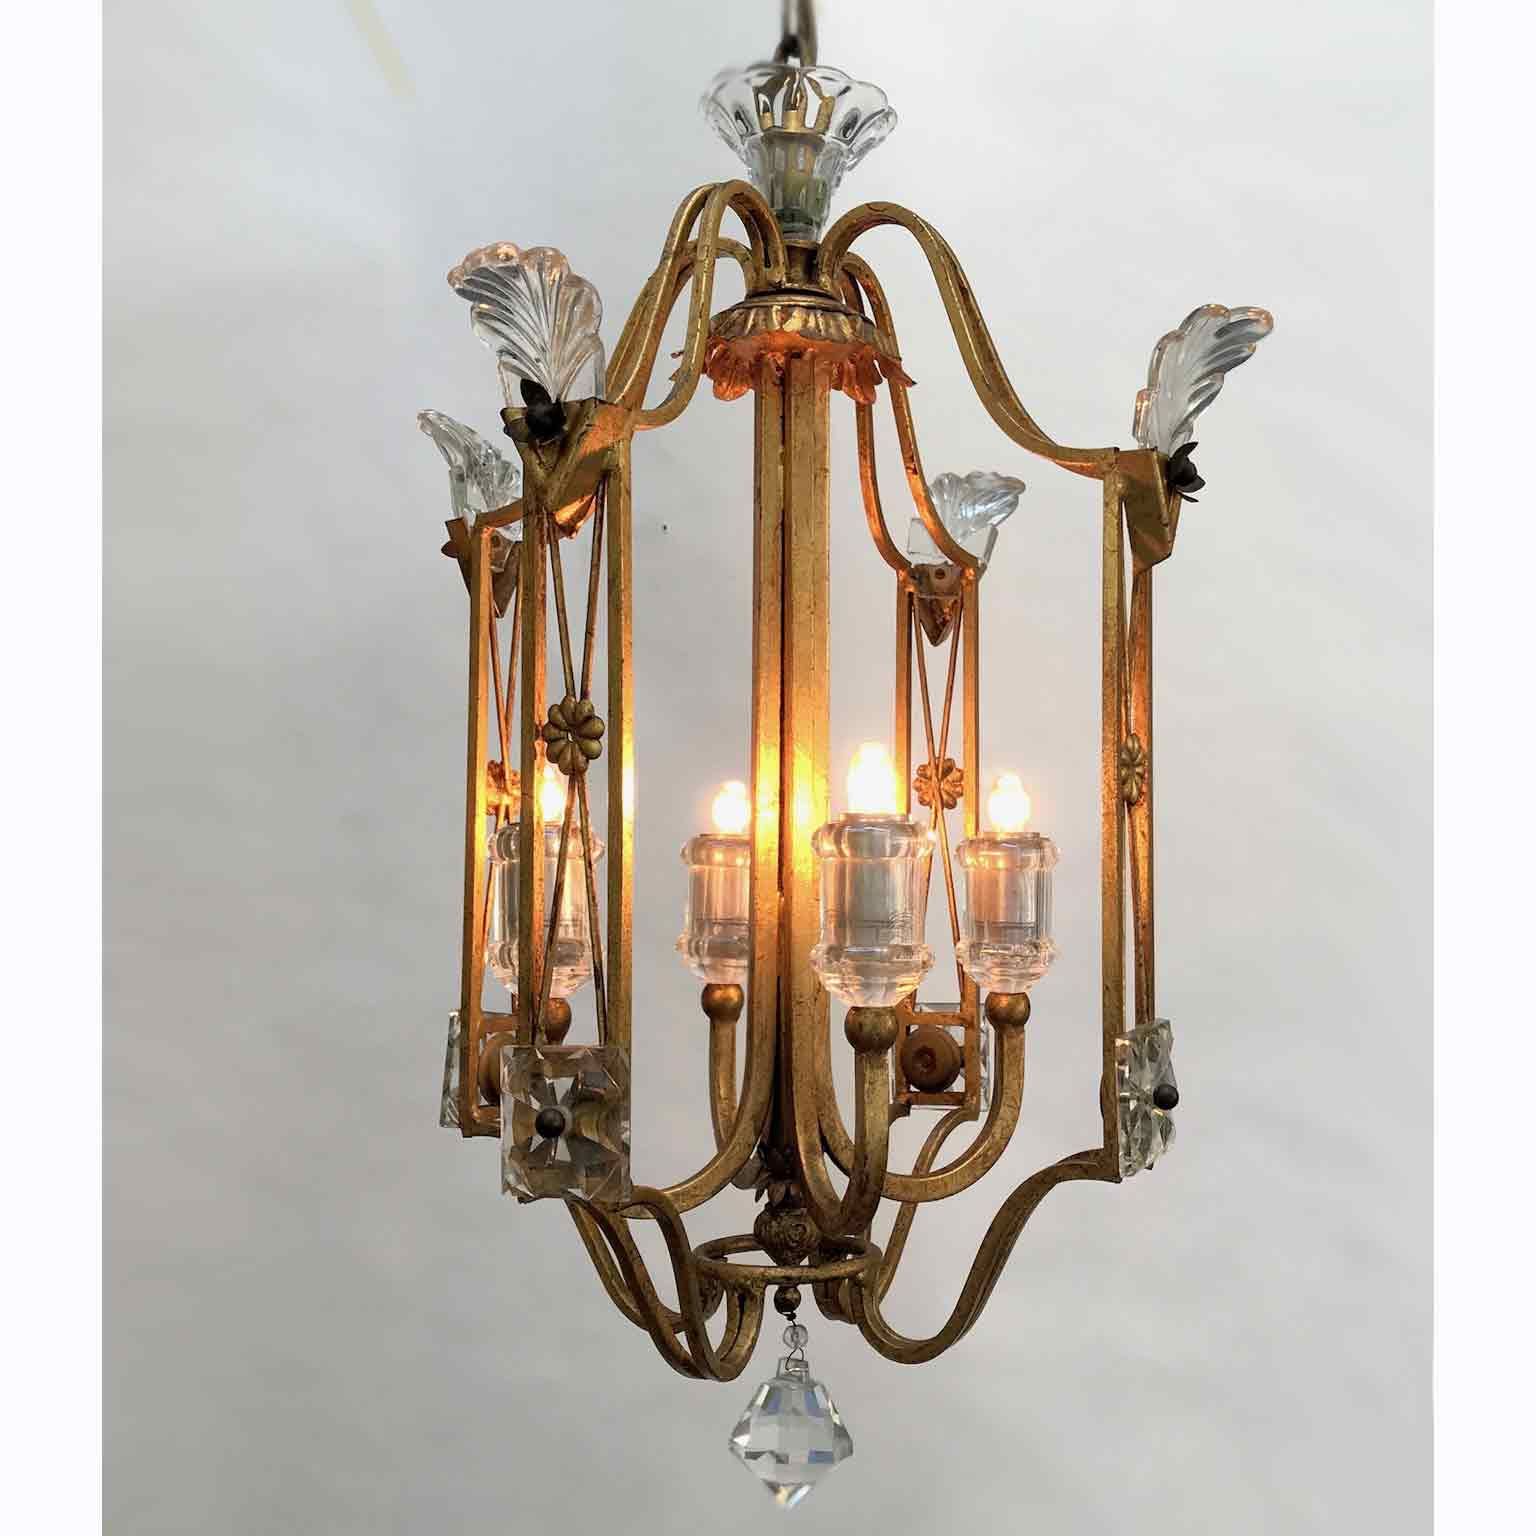 Ghilli Antiques In Milano Within Favorite Antique Gild Lantern Chandeliers (View 2 of 15)